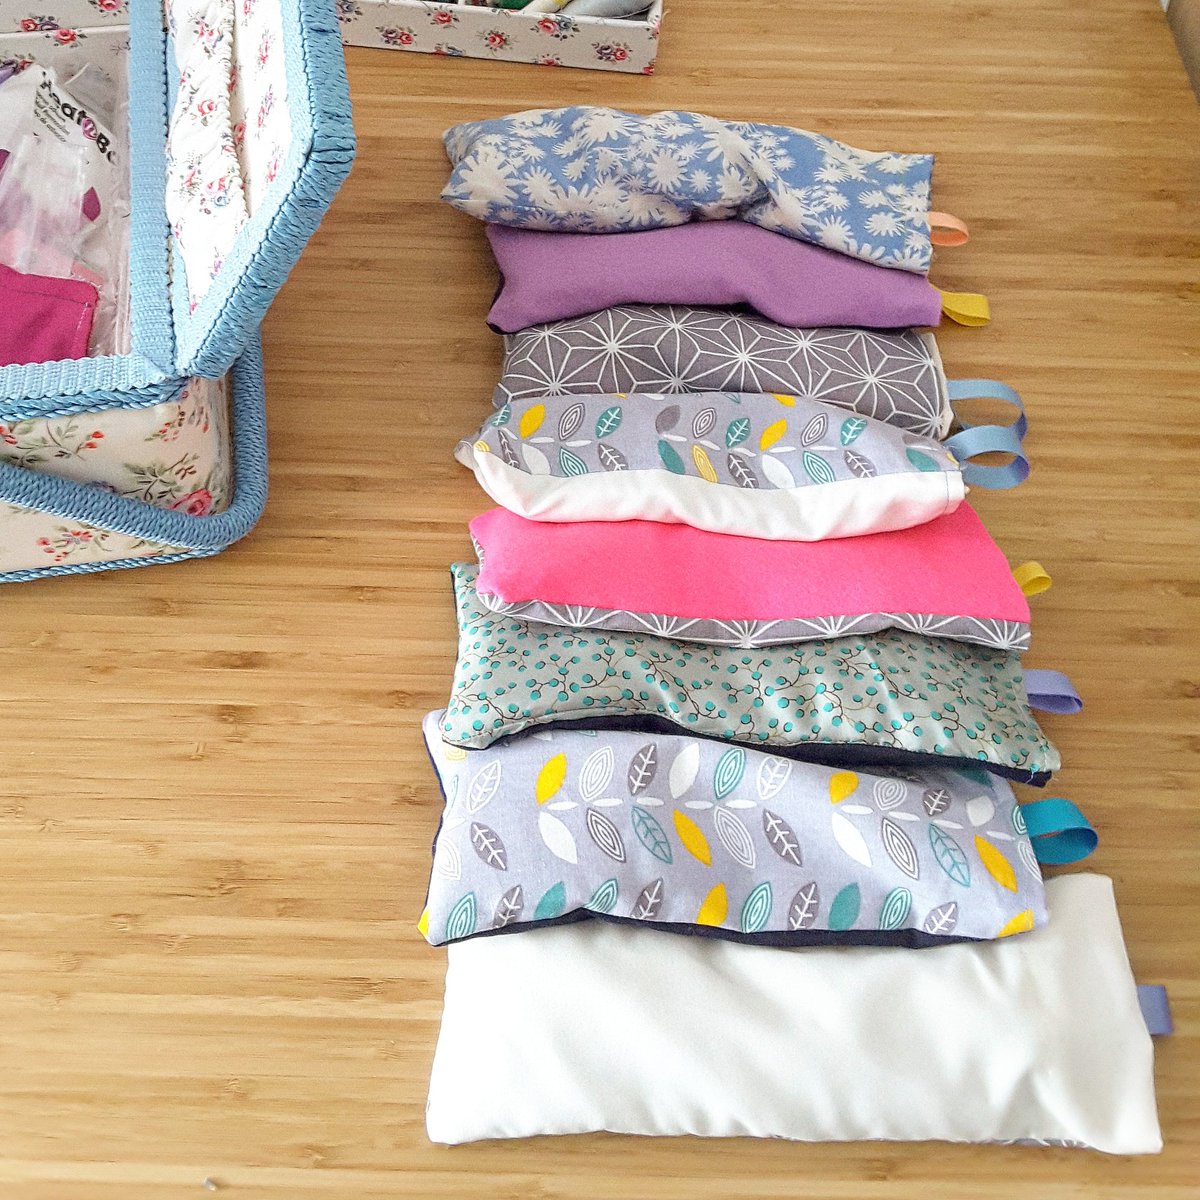 Getting busy making a new range of eye pillows. Our Yoga shop is open at all retreats and @YogawithElise studio in caversham #yogaretreats #yogalove #yoga #yogaretreat #homemade #eyepillows #eyepillowtorelax #eyepillow #relaxation #lavendereyepillow